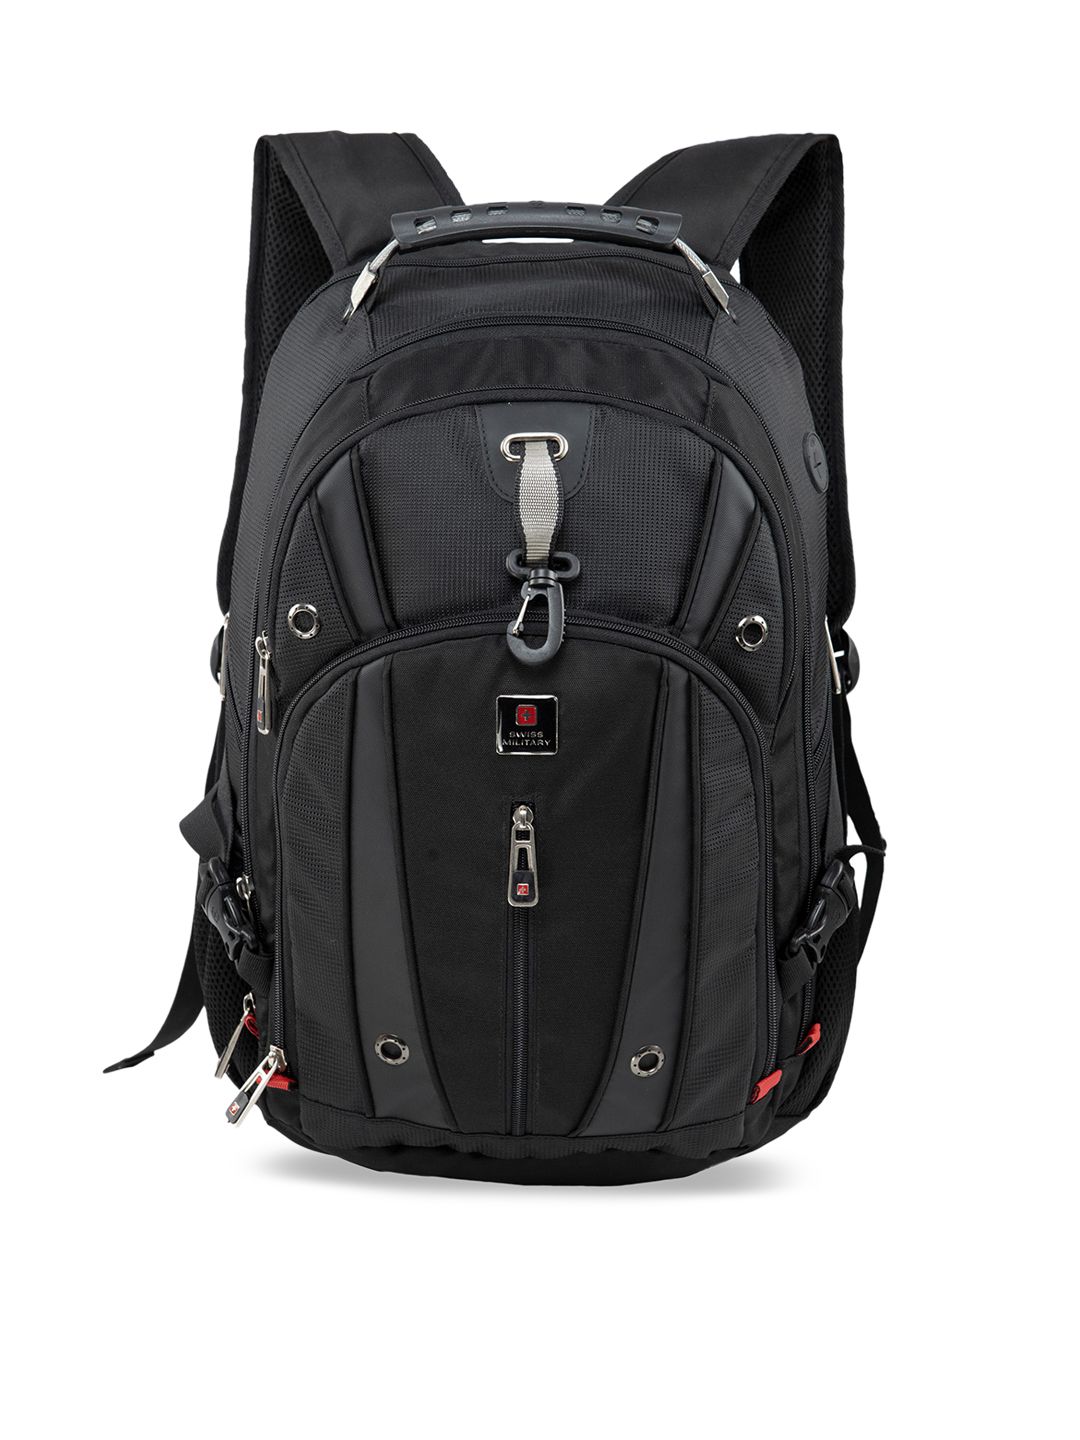 SWISS MILITARY Unisex Black Solid Backpack Price in India